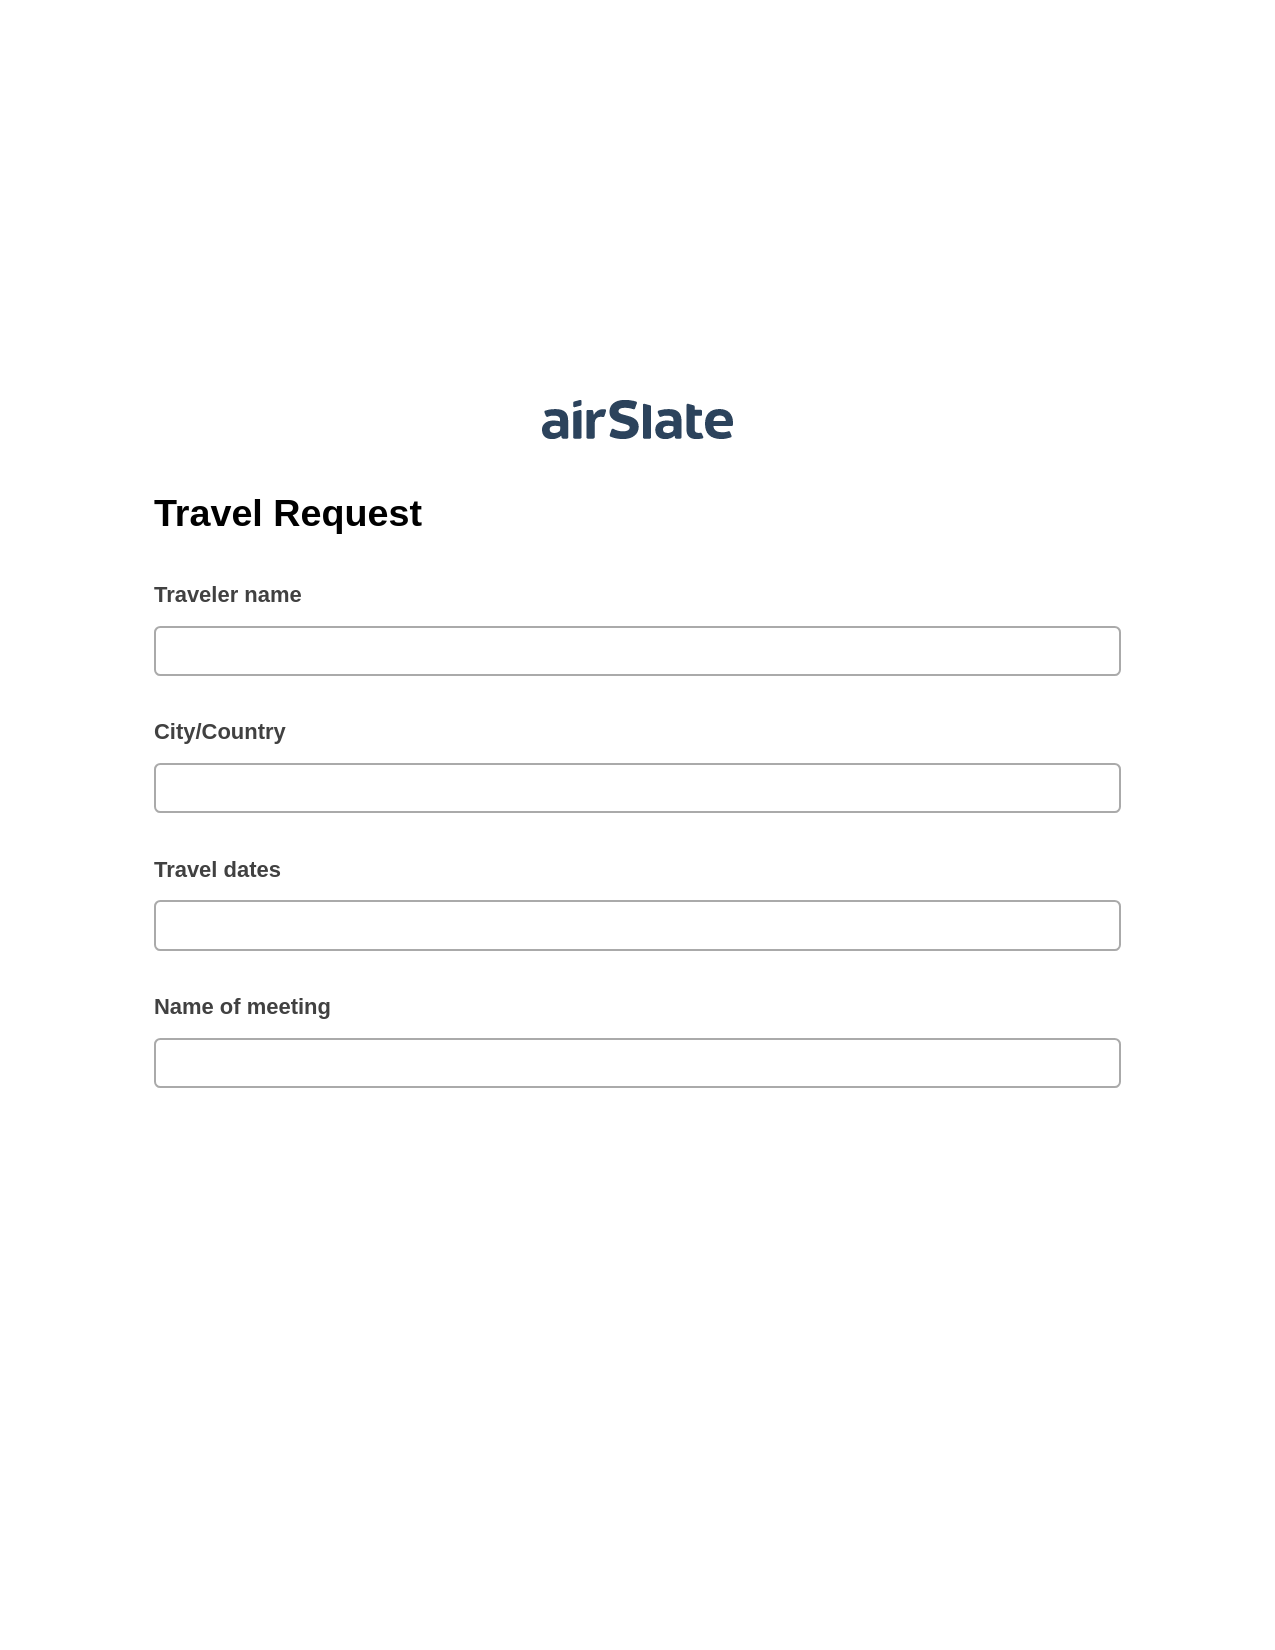 Travel Request Pre-fill from Salesforce Record Bot, Create slate from another Flow Bot, Export to Formstack Documents Bot